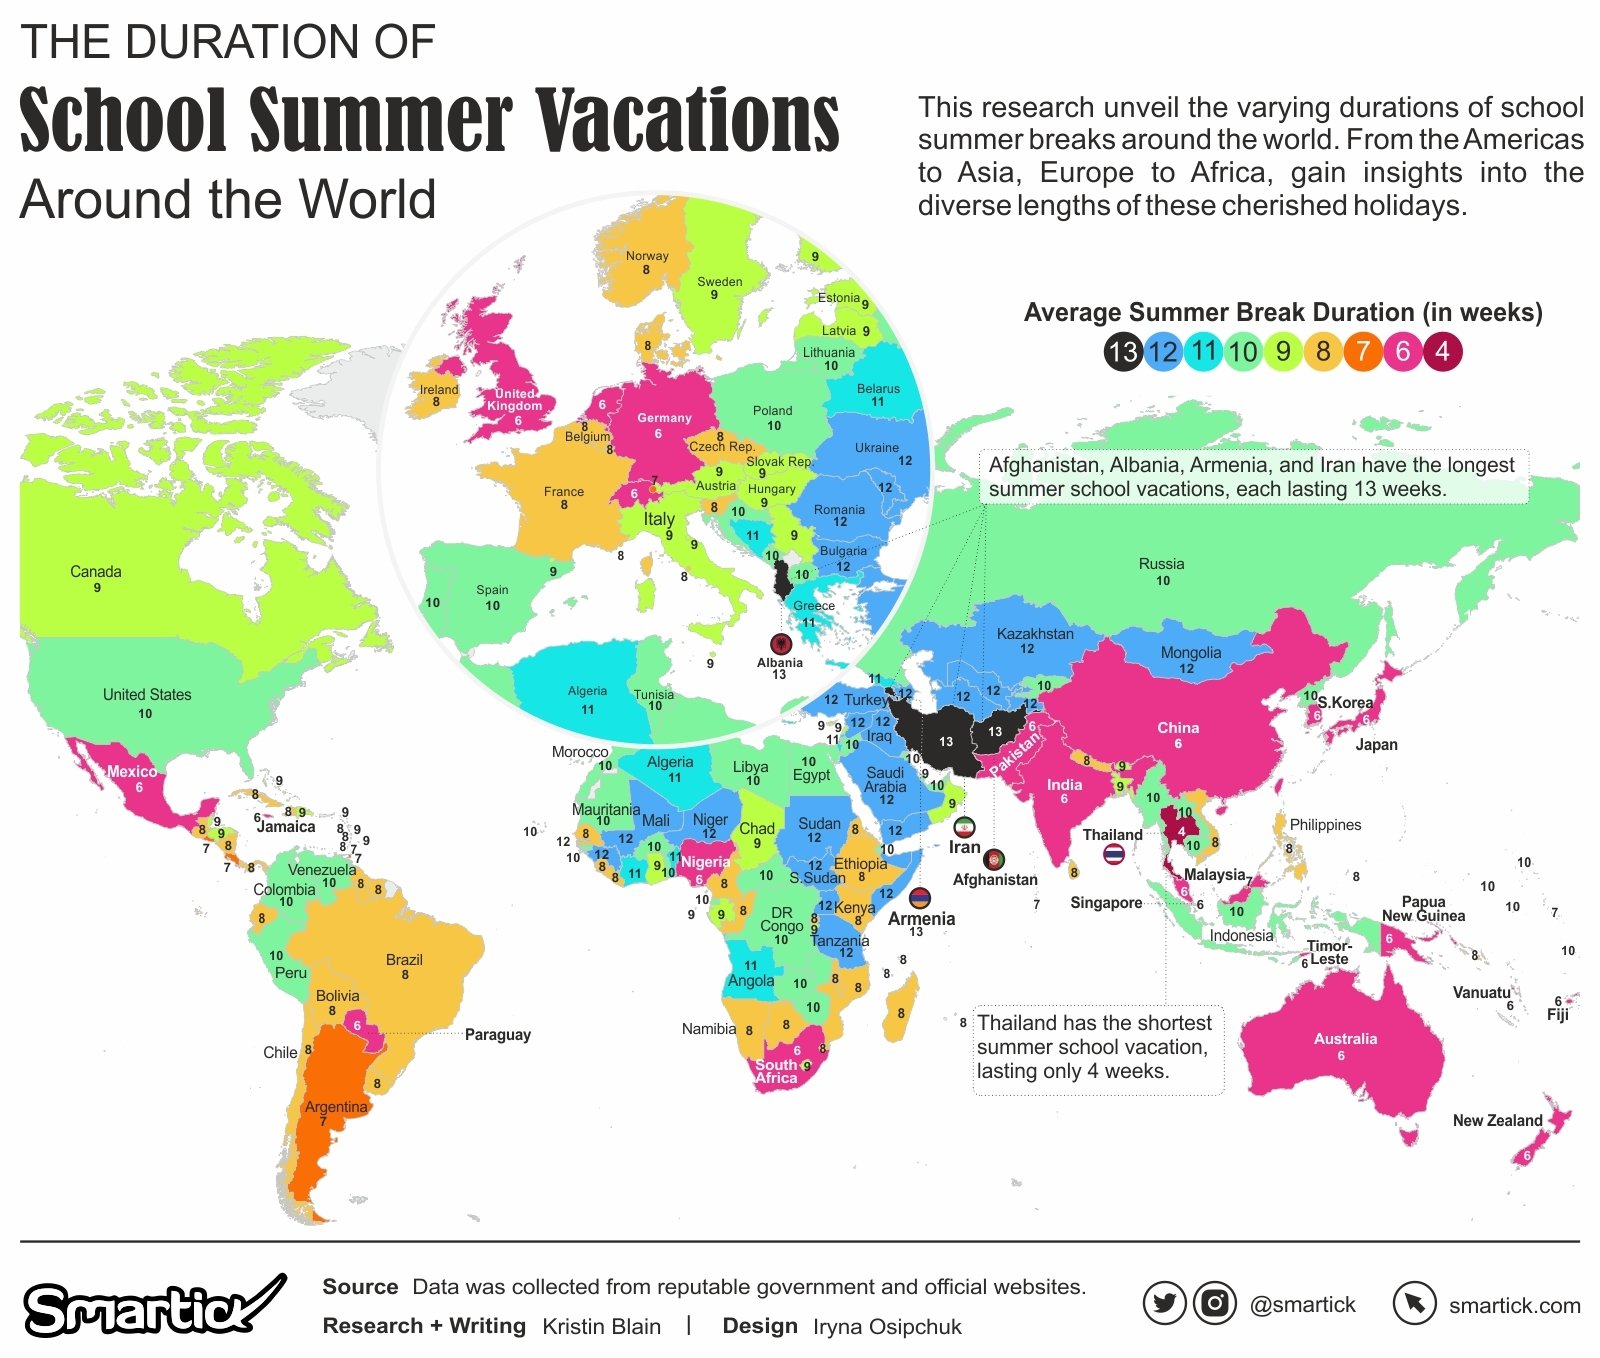 Visualizing the Duration of School Summer Vacations Around the World